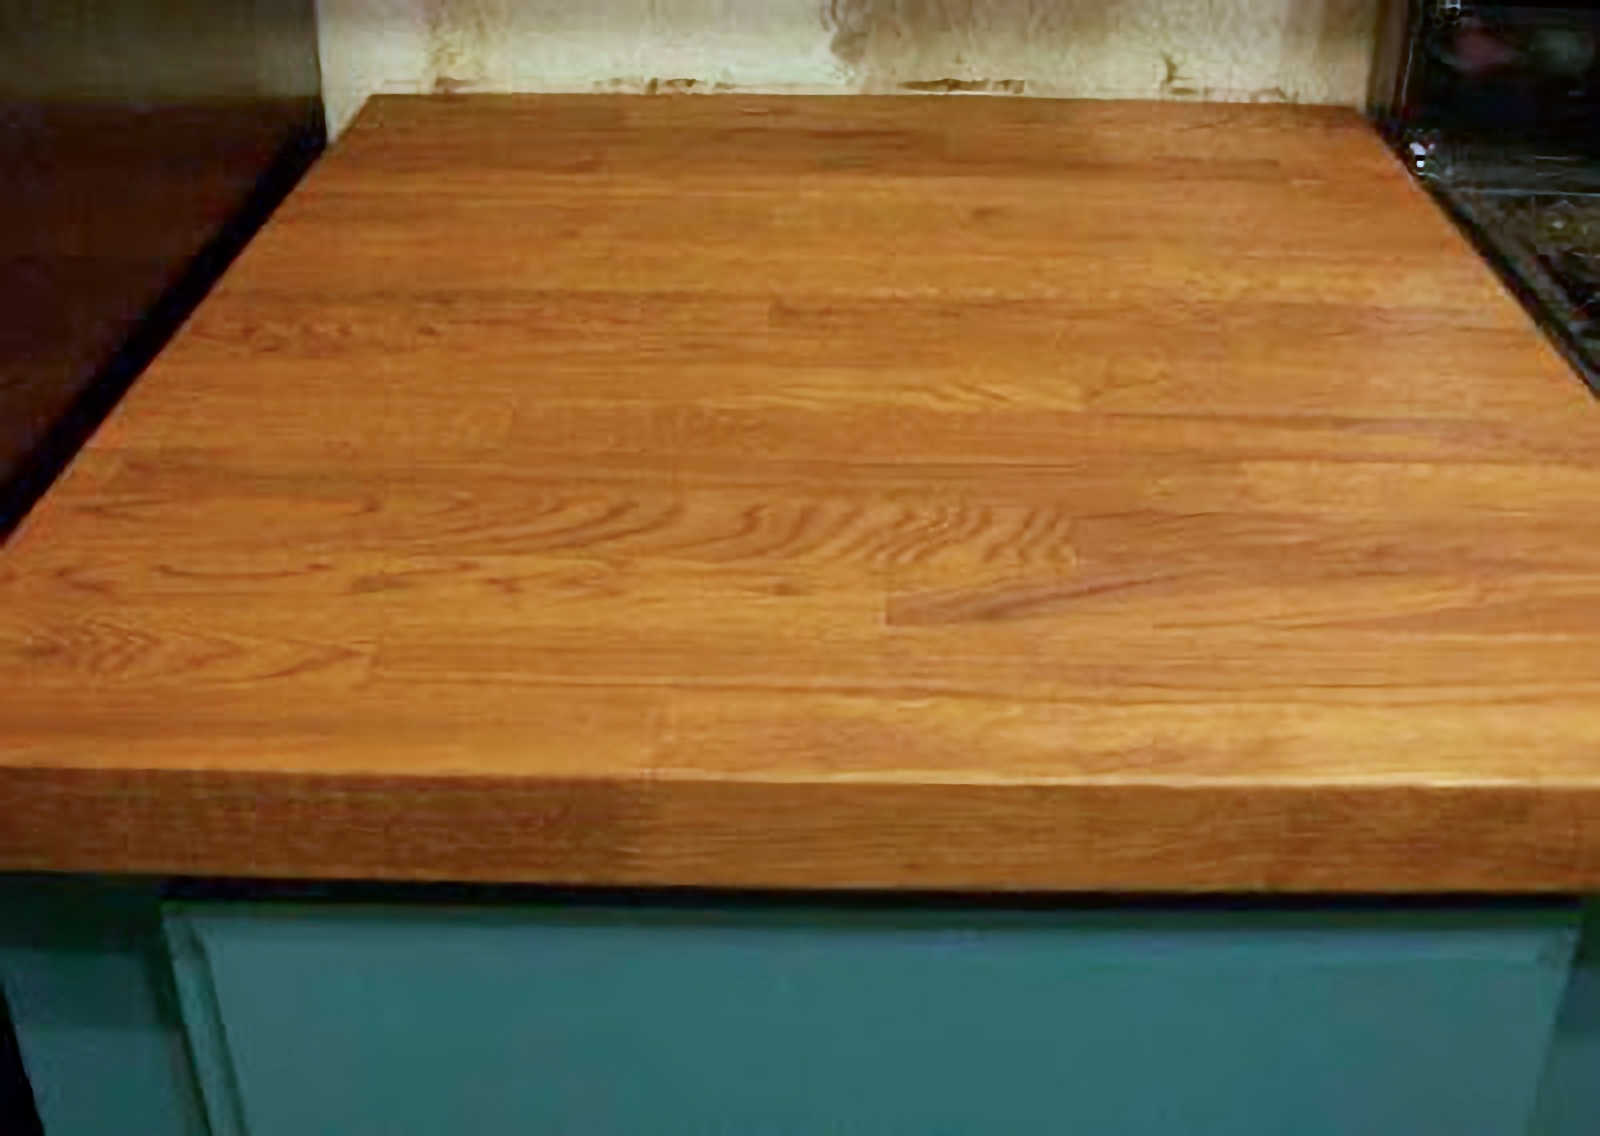 IKEA oak butcher block countertops with one coat of Minwax stain in English Chestnut